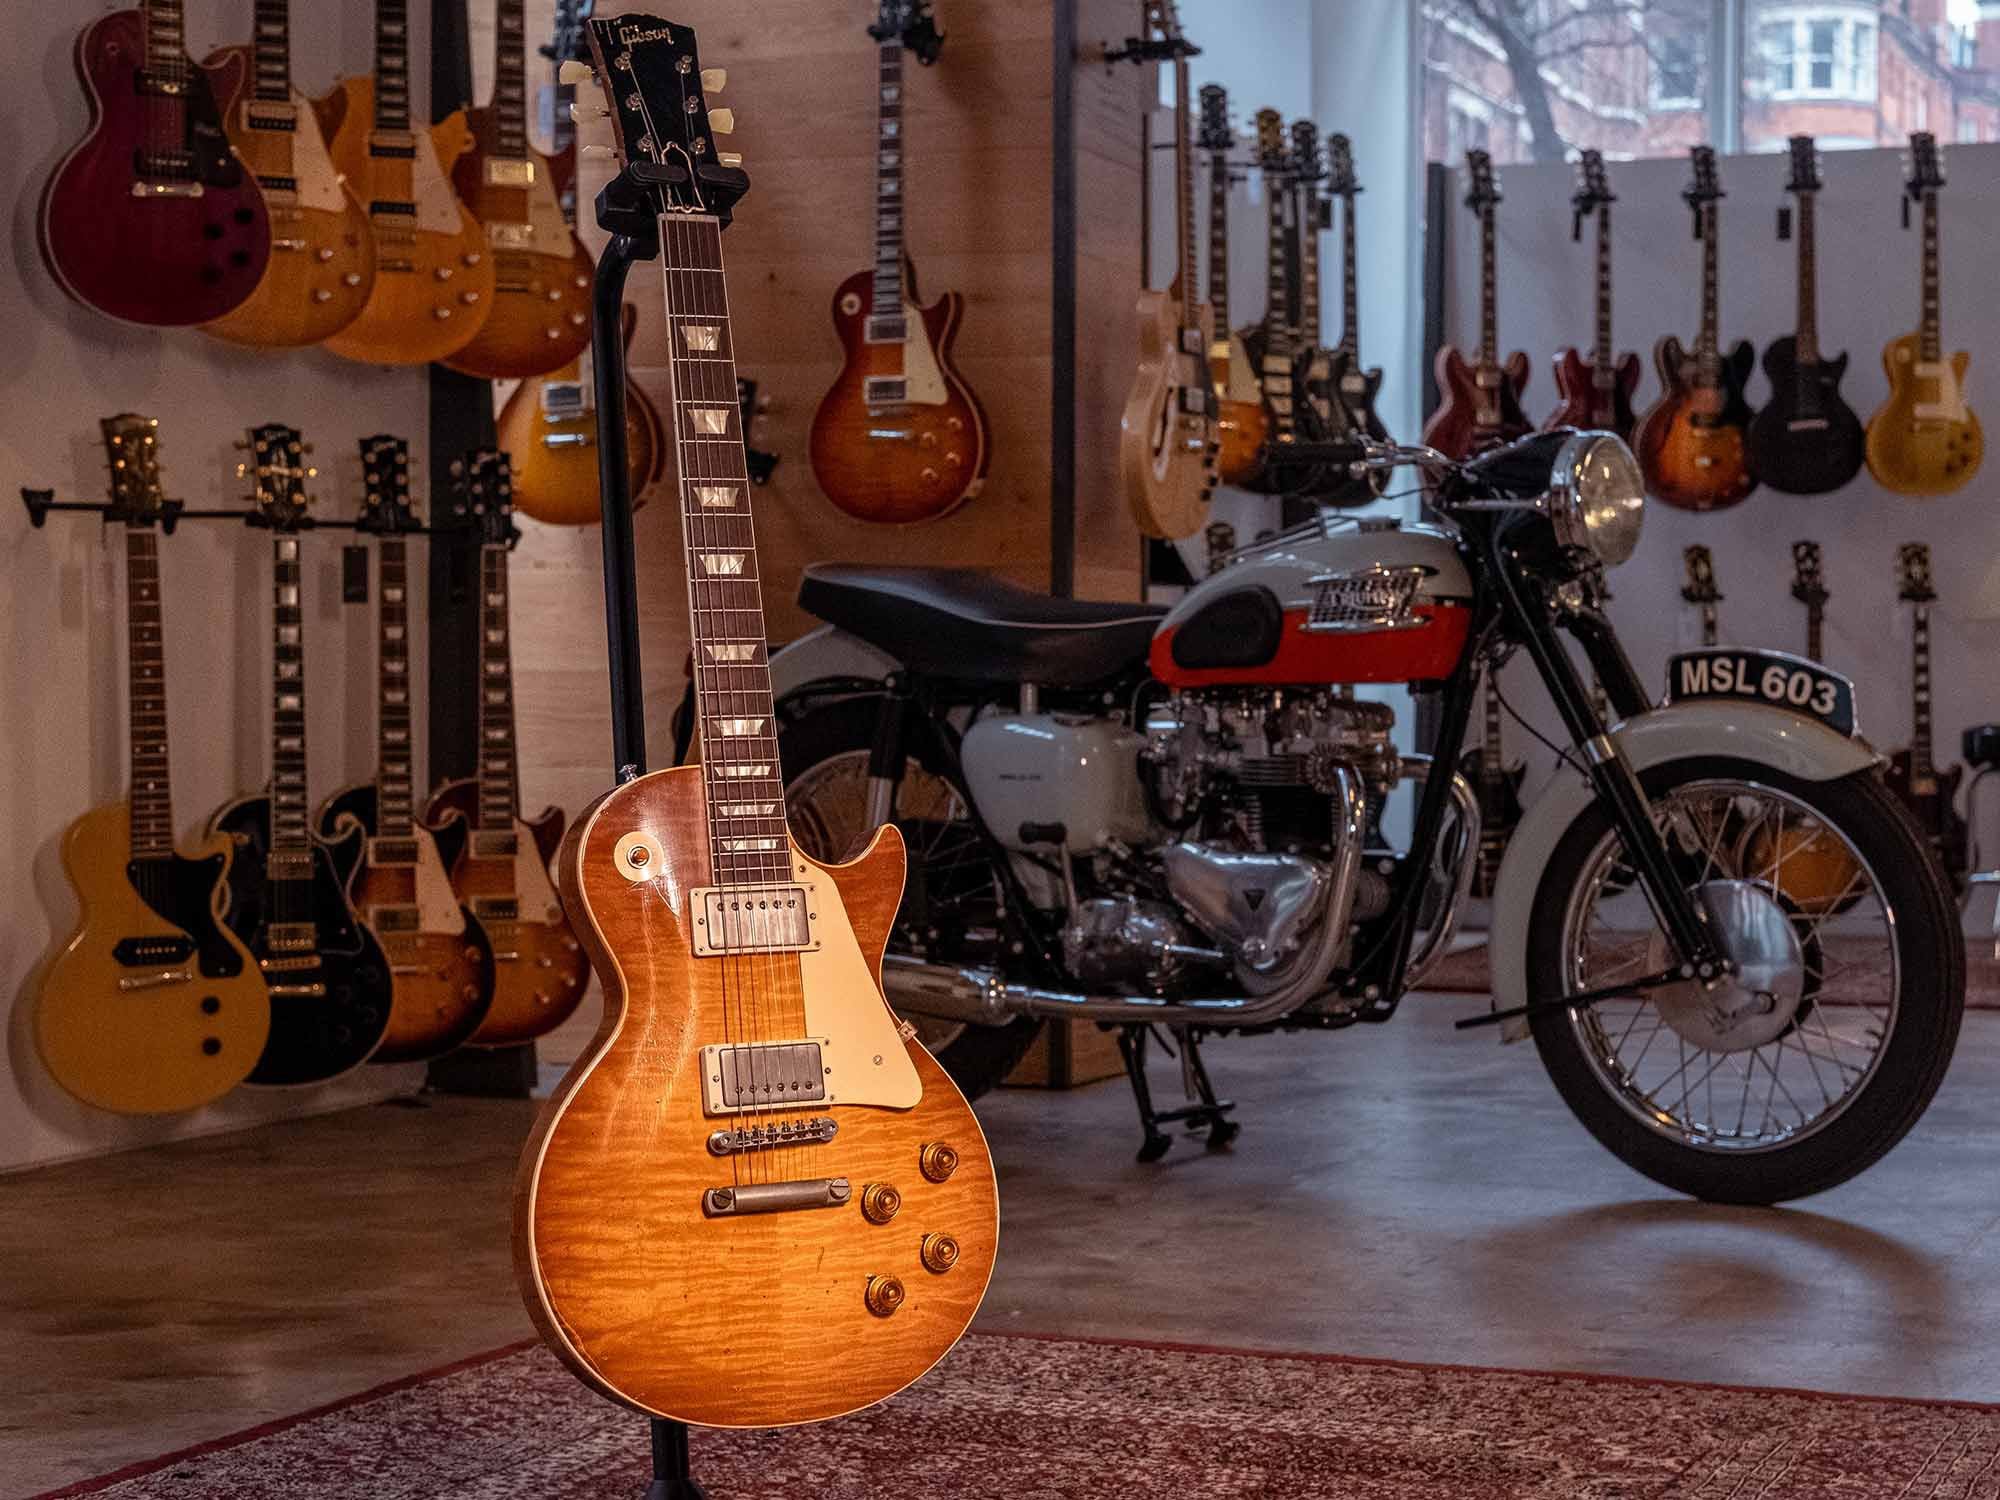 Here are the originals that influenced the 2022 builds: a 1959 Les Paul Standard and a 1959 Triumph Bonneville T120.